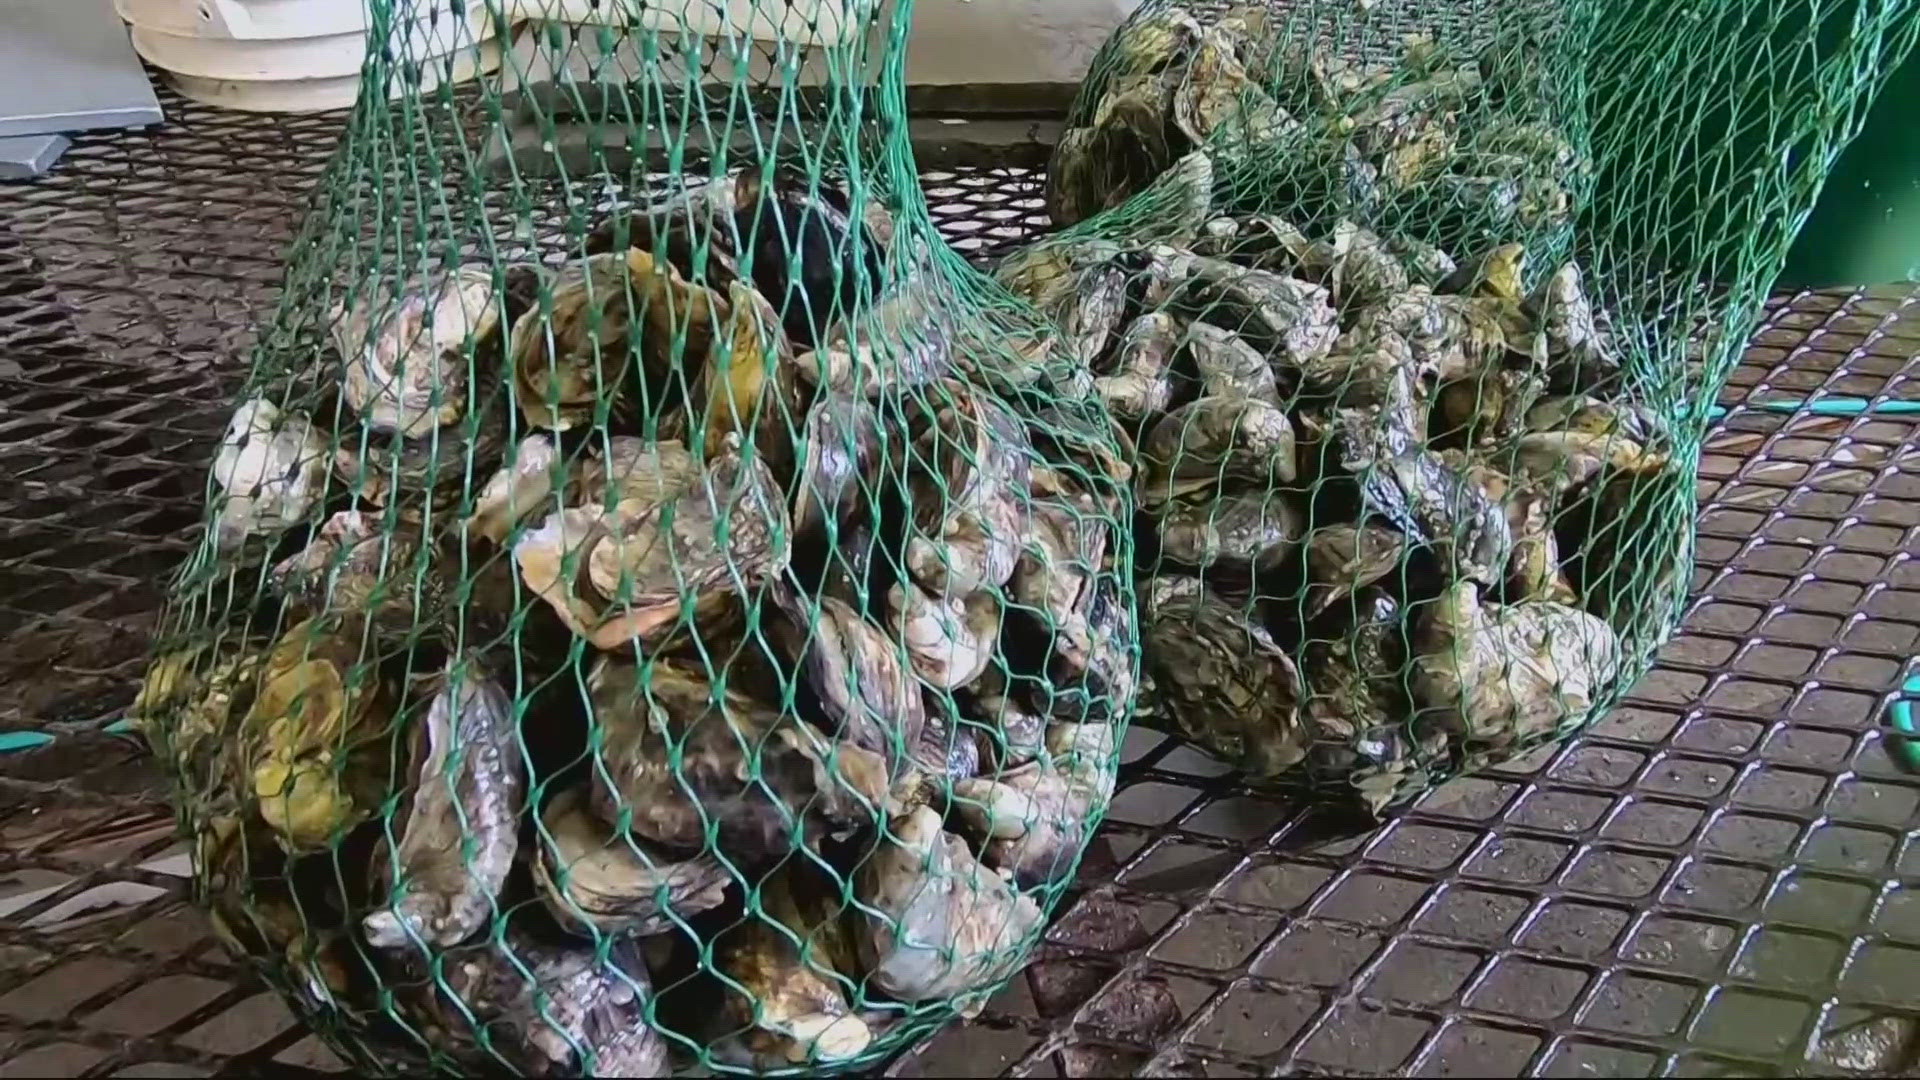 The FDA is advising people across the country not to eat mussels, oysters and clams harvested from Oregon and Washington.